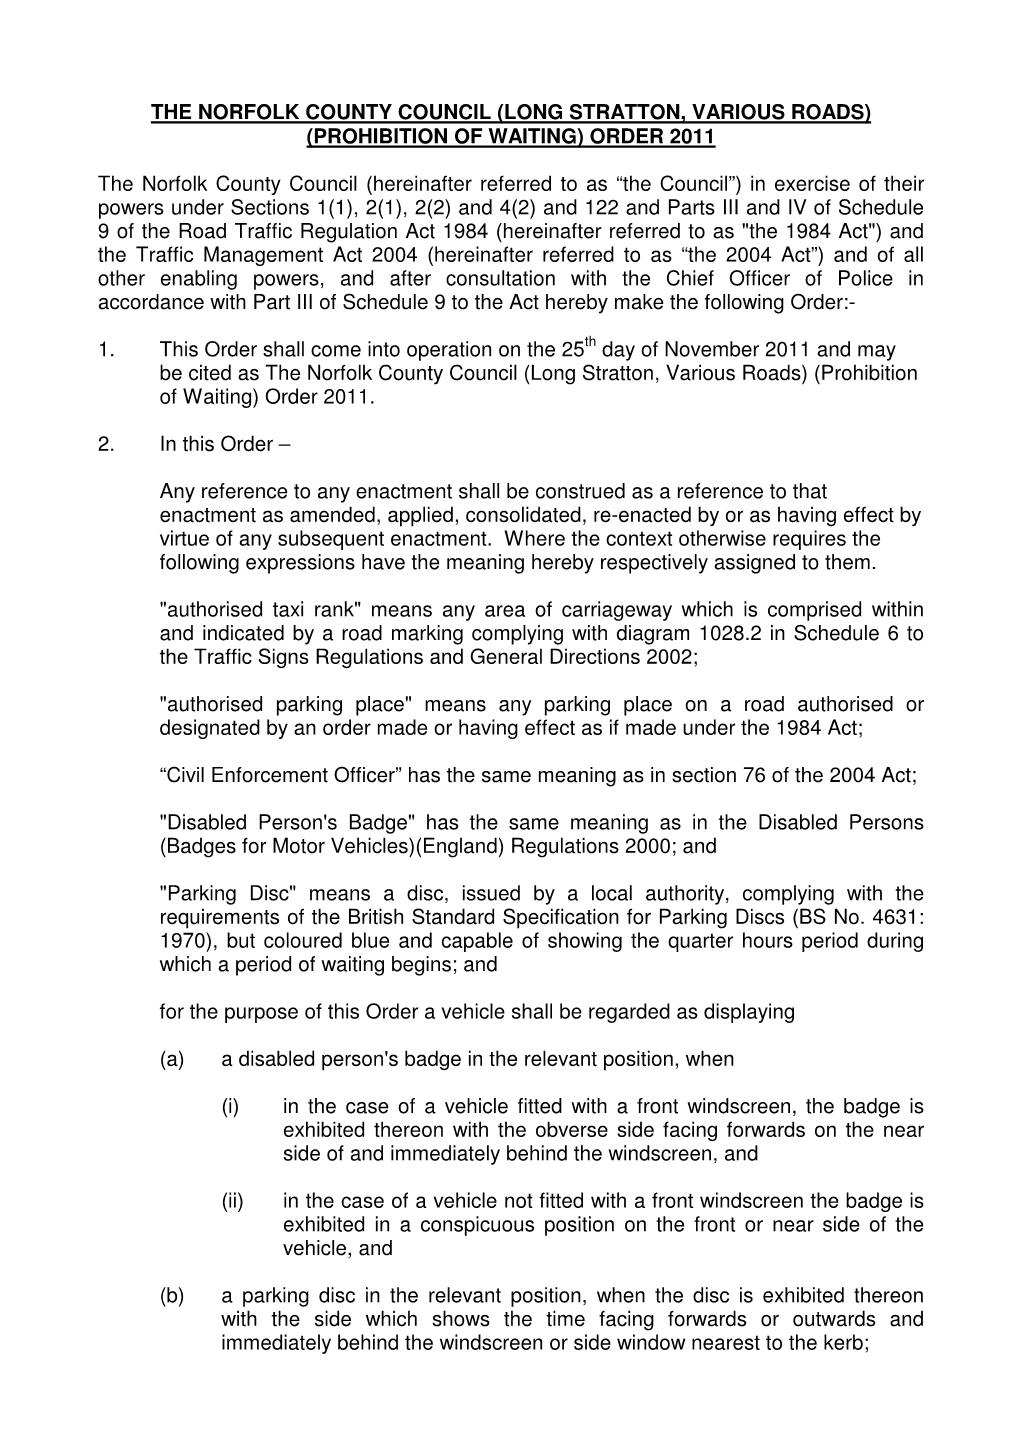 The Norfolk County Council (Long Stratton, Various Roads) (Prohibition of Waiting) Order 2011